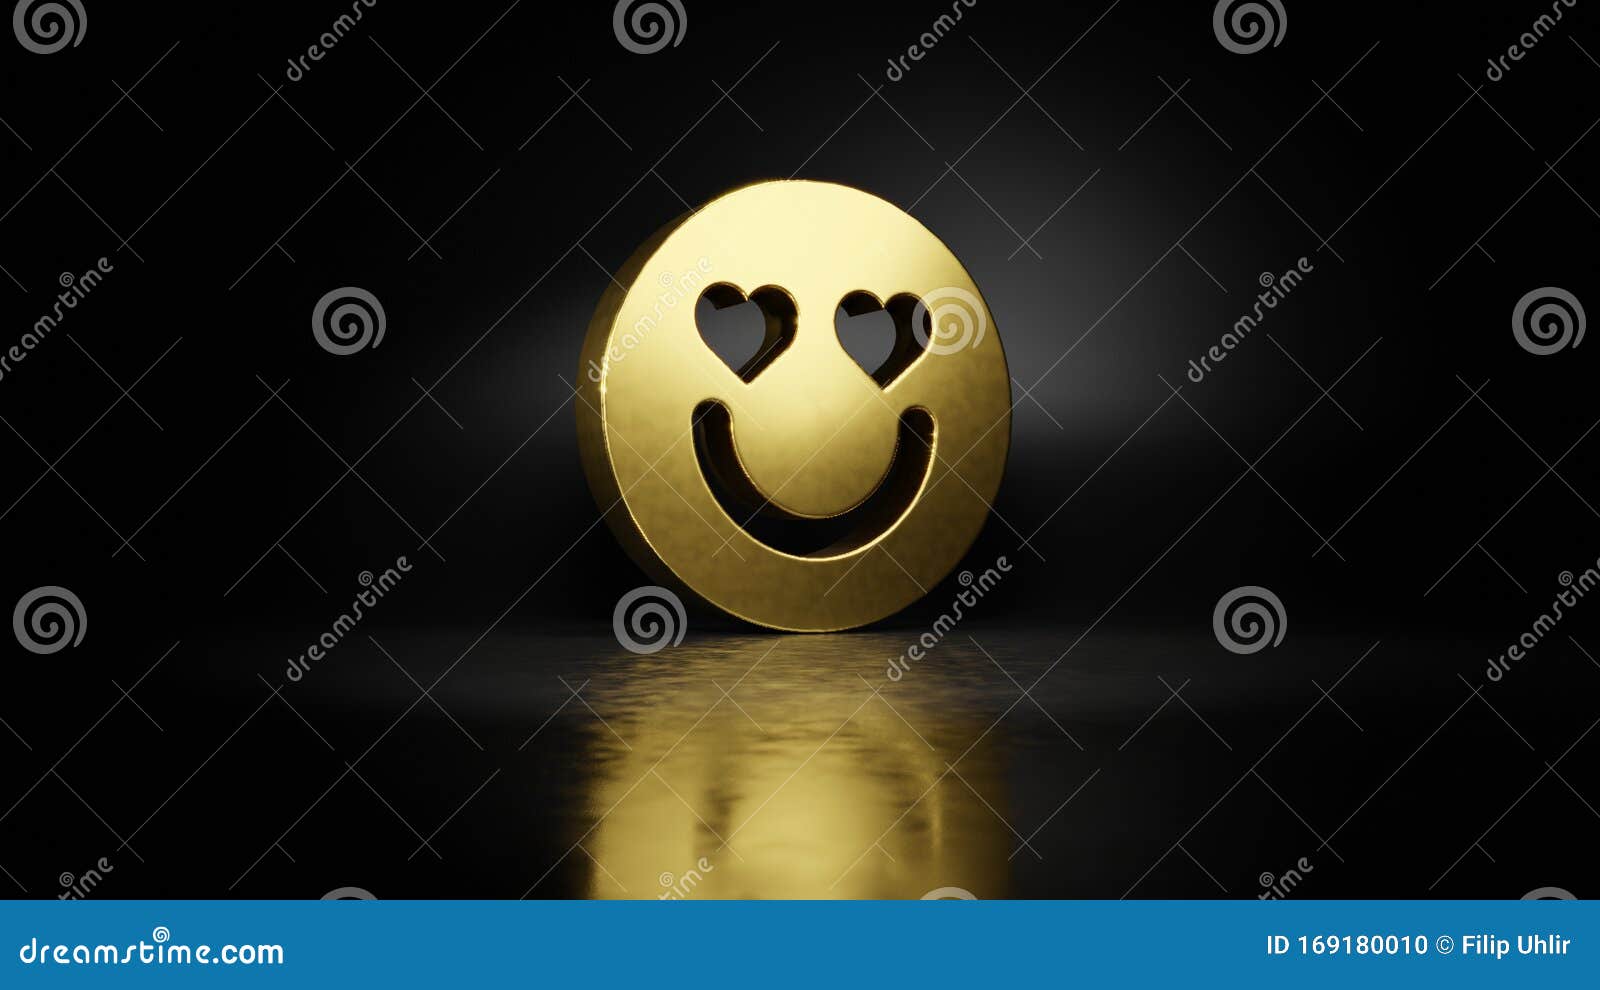 Gold Metal Symbol of Emoticons in Love 3D Rendering with Blurry Reflection  on Floor with Dark Background Stock Illustration - Illustration of emoticon,  precious: 169180010